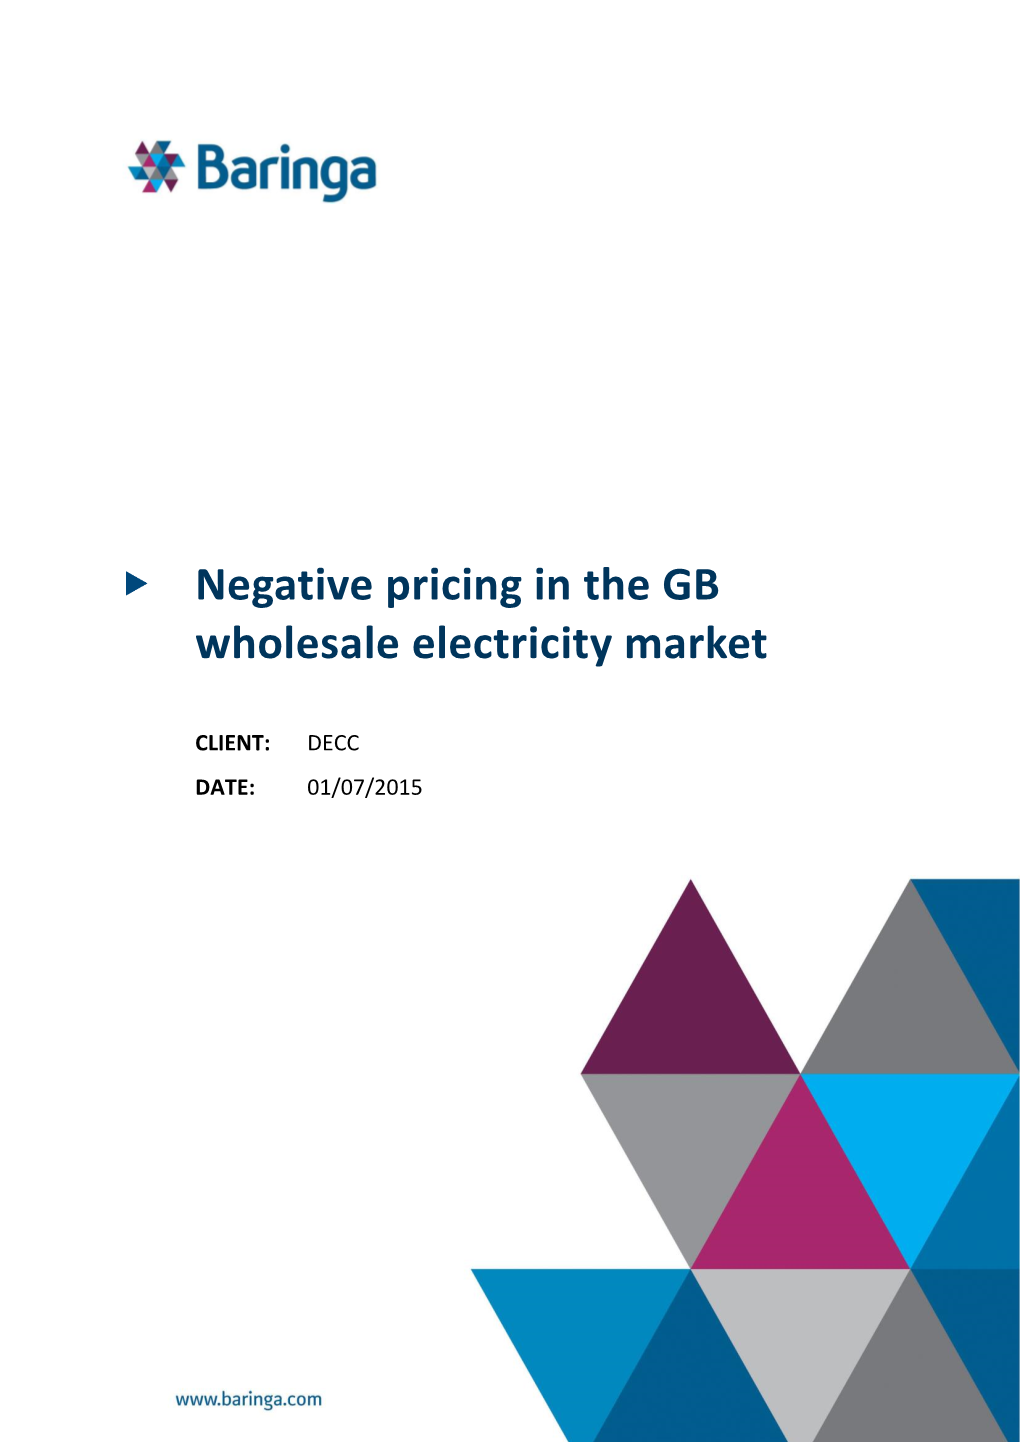 Negative Pricing in the GB Wholesale Electricity Market